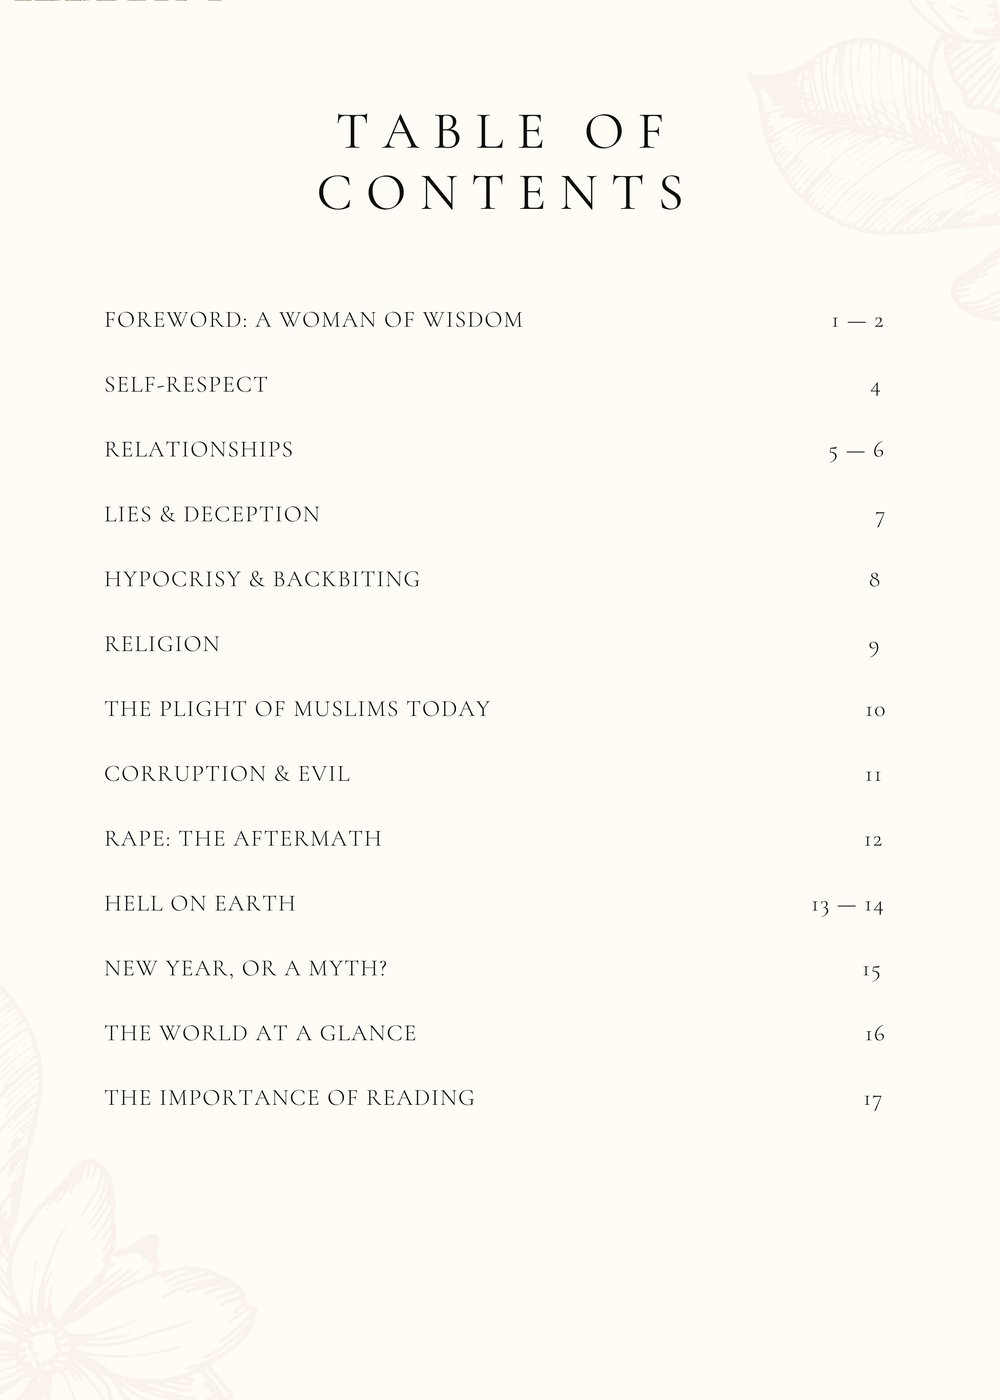 Table of Contents.jpg